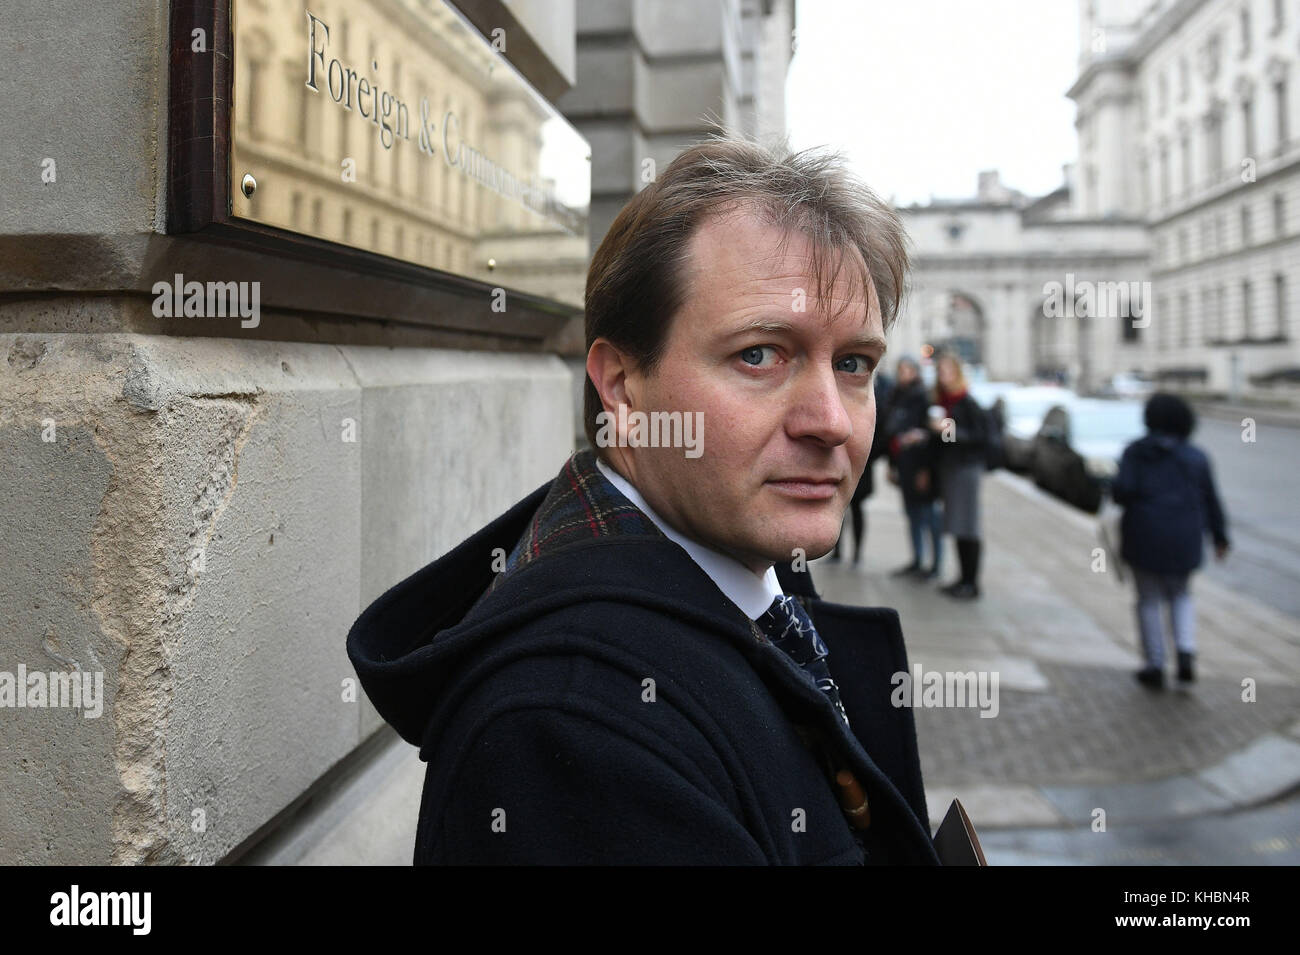 Richard Ratcliffe, the husband of Nazanin Zaghari Ratcliffe who is being detained in Iran, arrives for a meeting with Foreign Secretary Boris Johnson at the Foreign & Commonwealth Office in London. Stock Photo